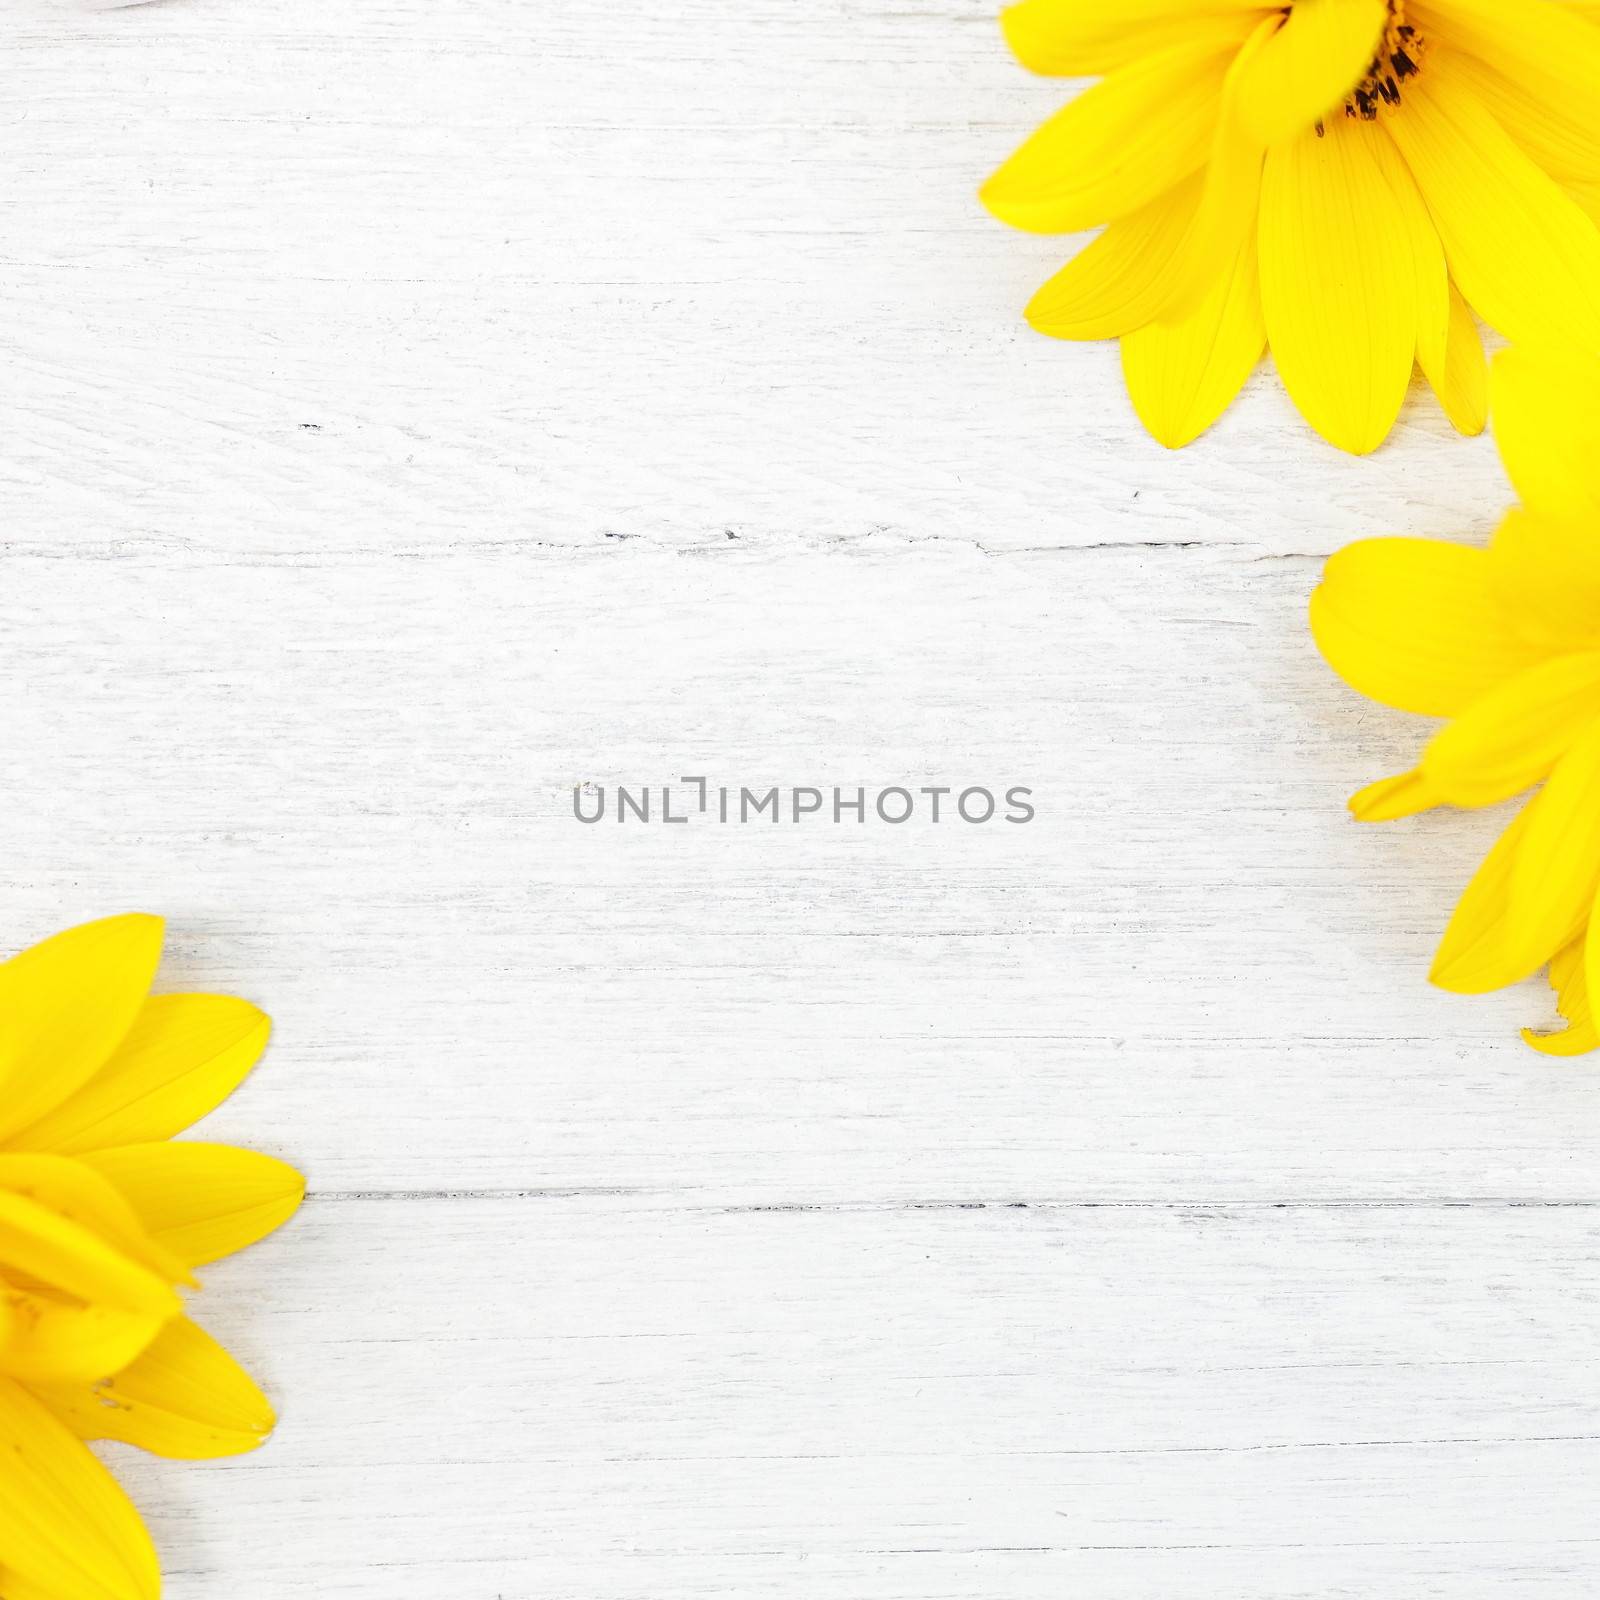 Textured white painted wood background with pretty vibrant yellow summer flowers in two diagonal corners and copyspace between